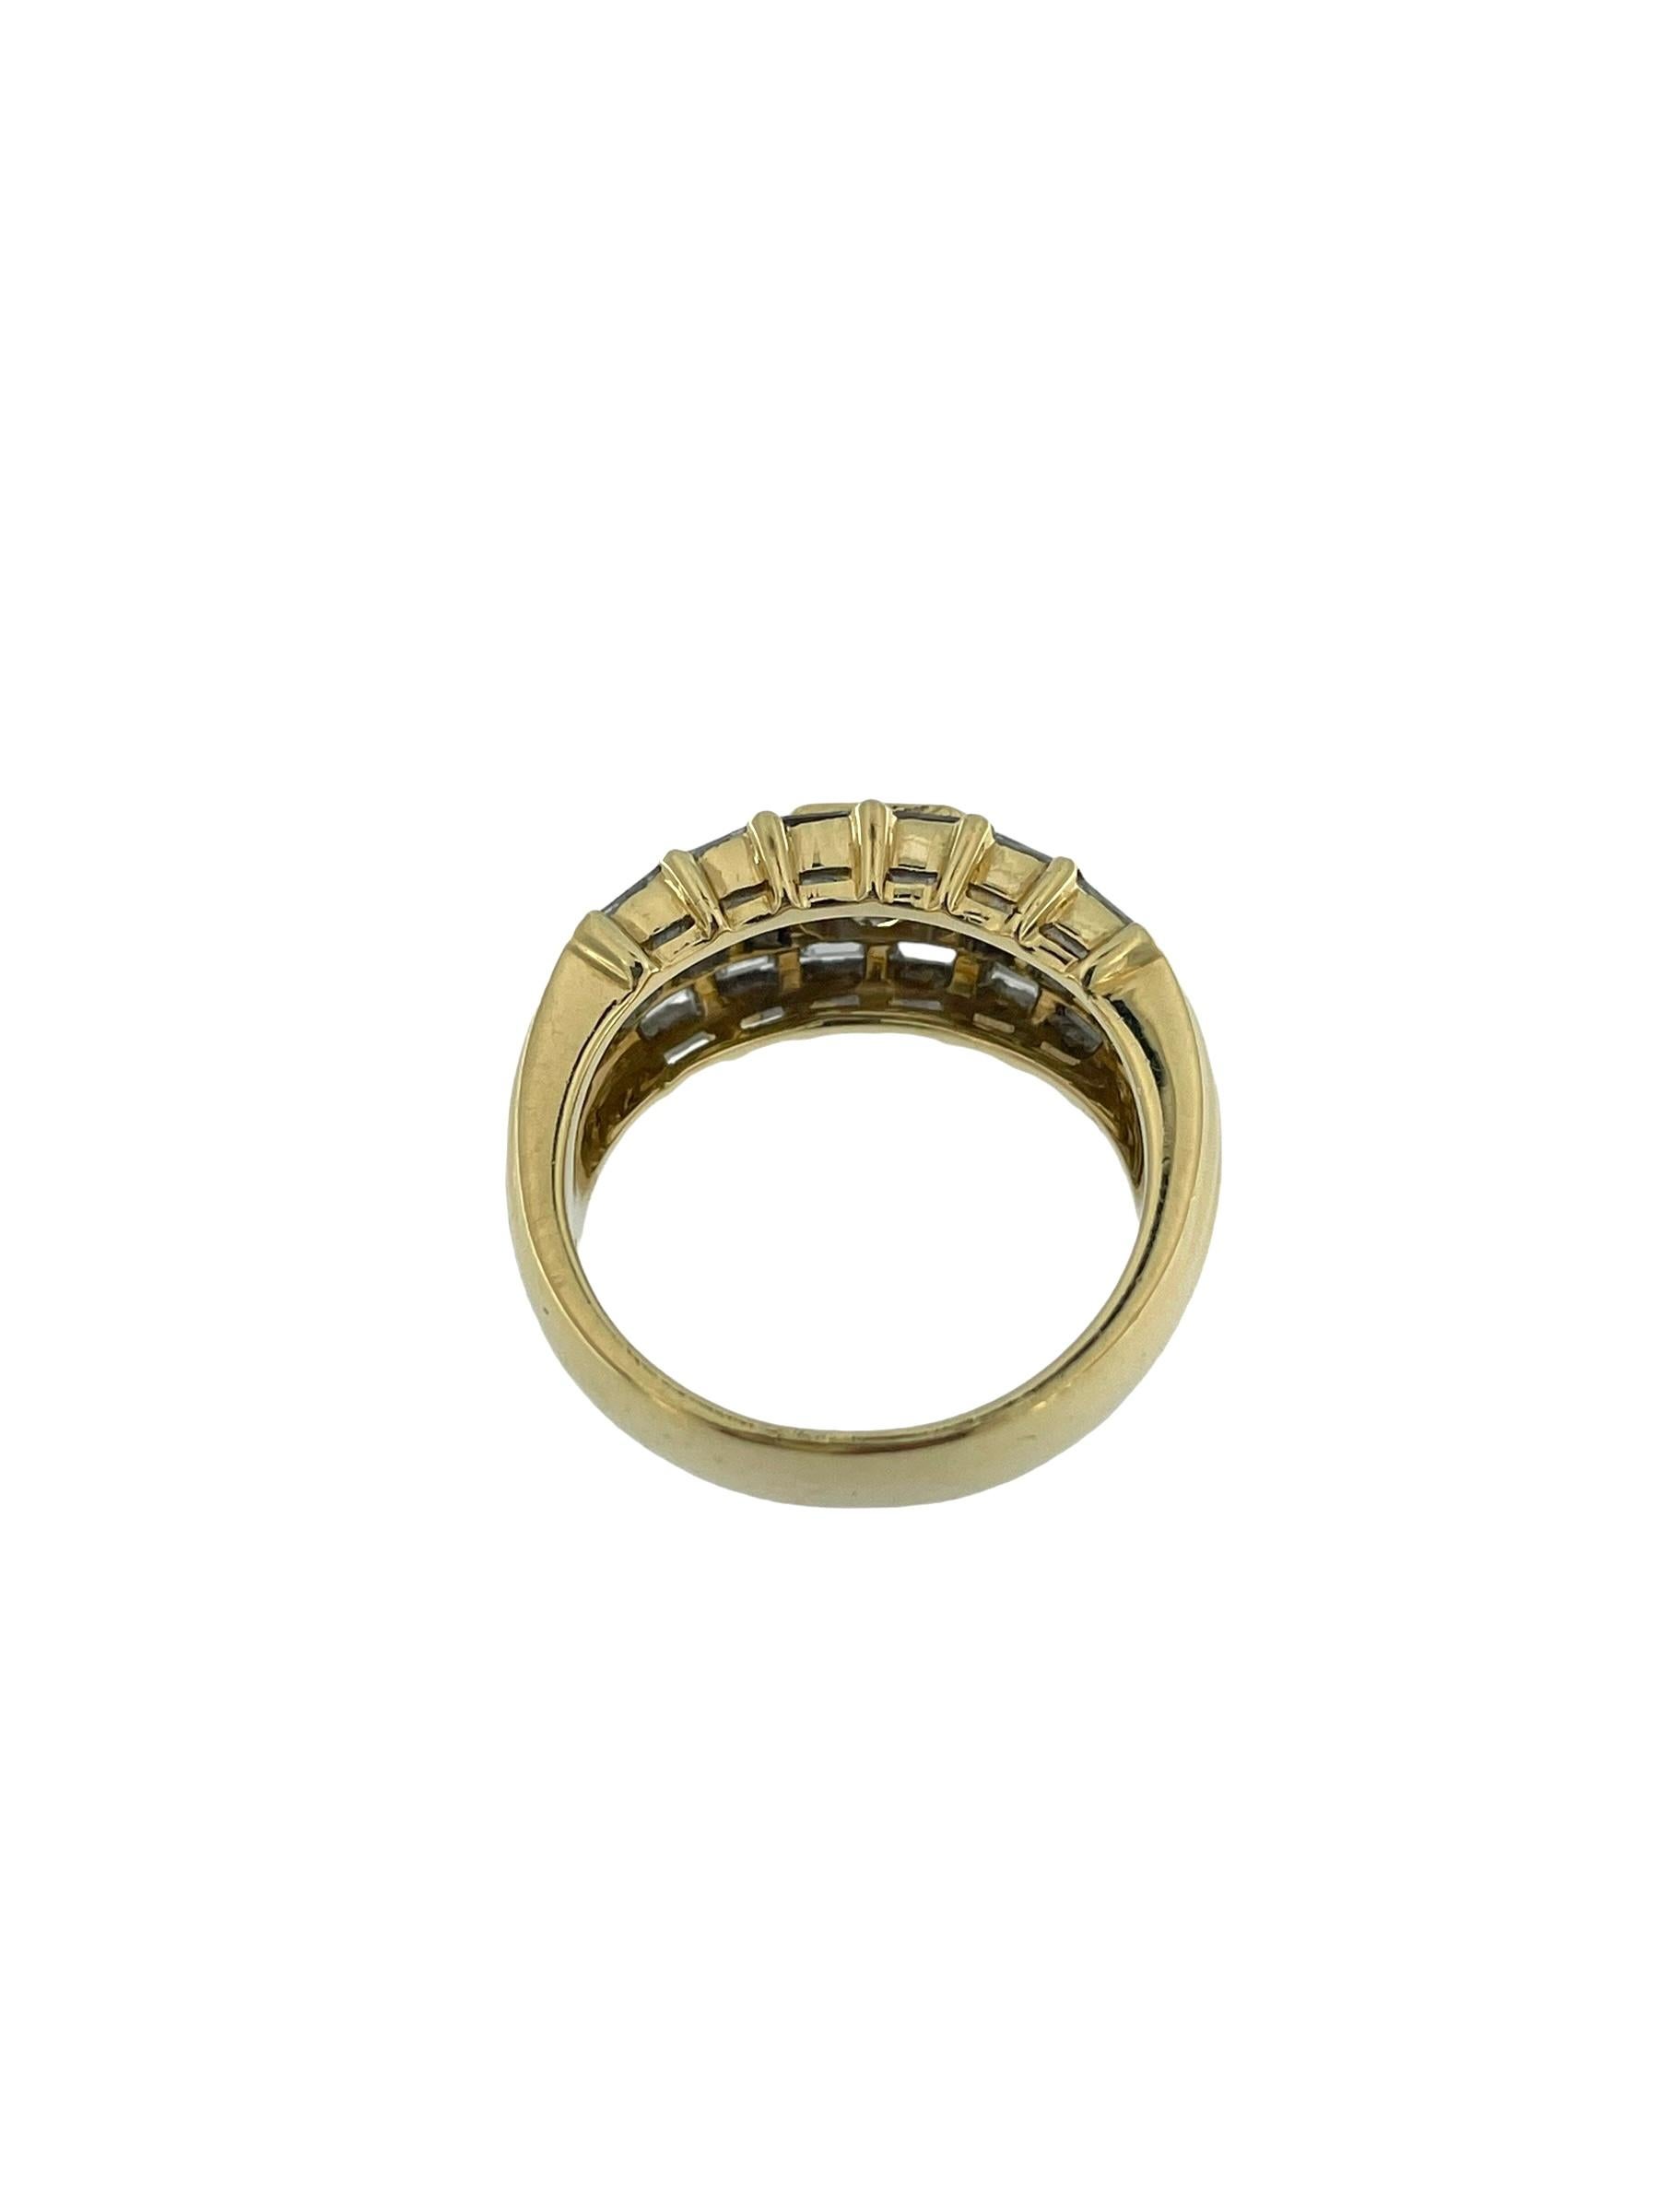 Women's or Men's HRD Certified Yellow Gold Cocktail Ring 1.90ct Diamonds For Sale